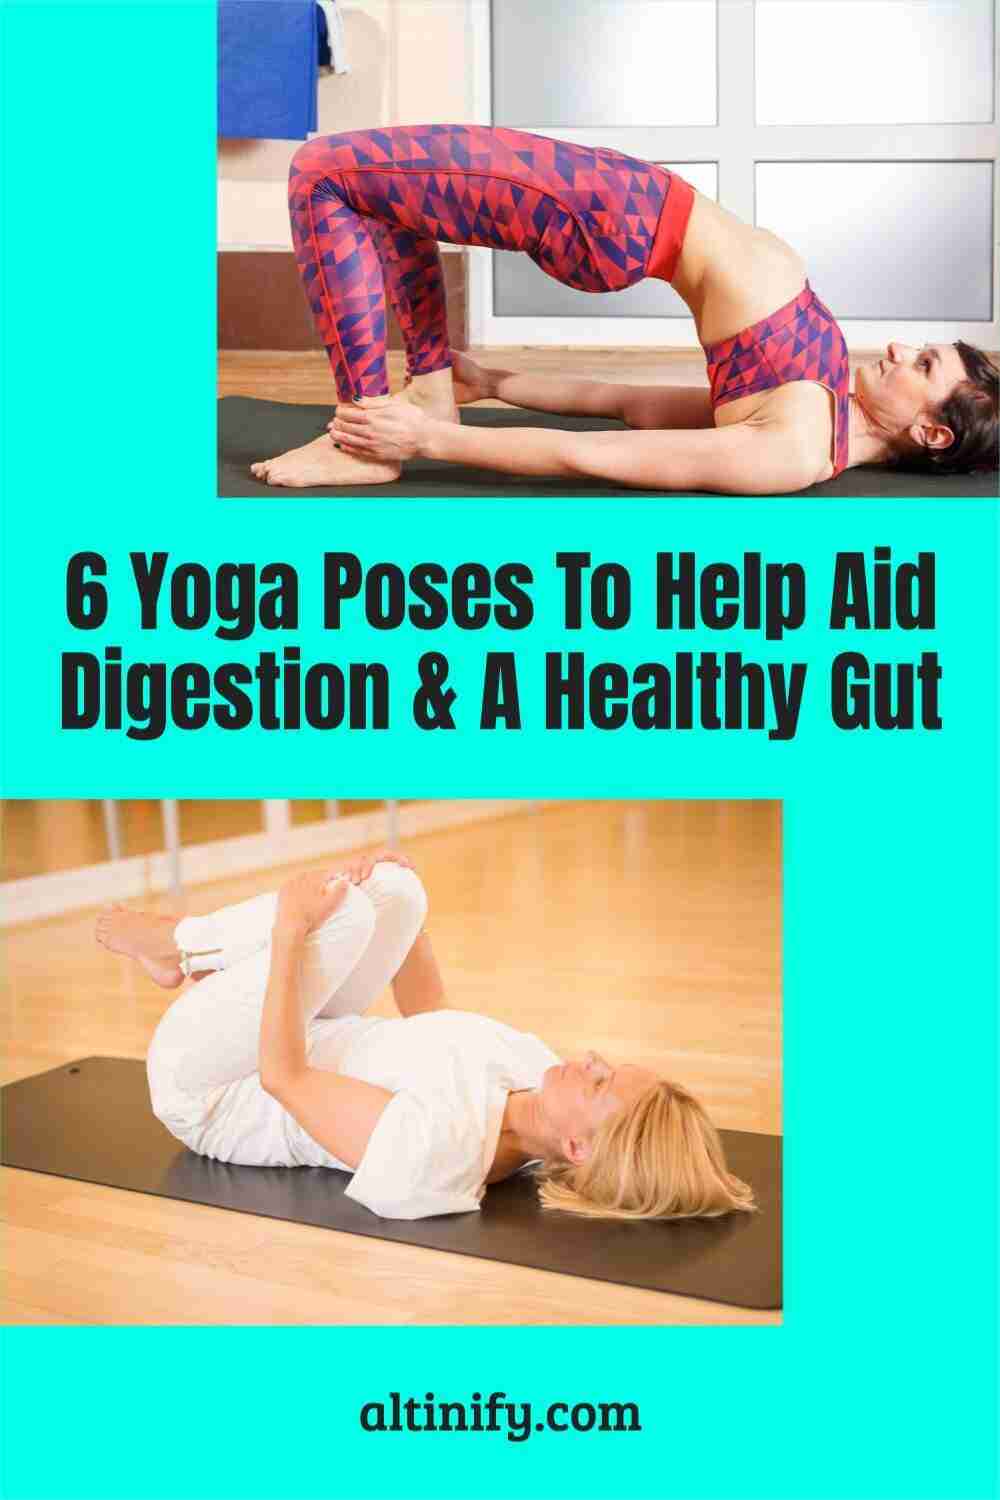 6 Yoga Poses for the Digestive System